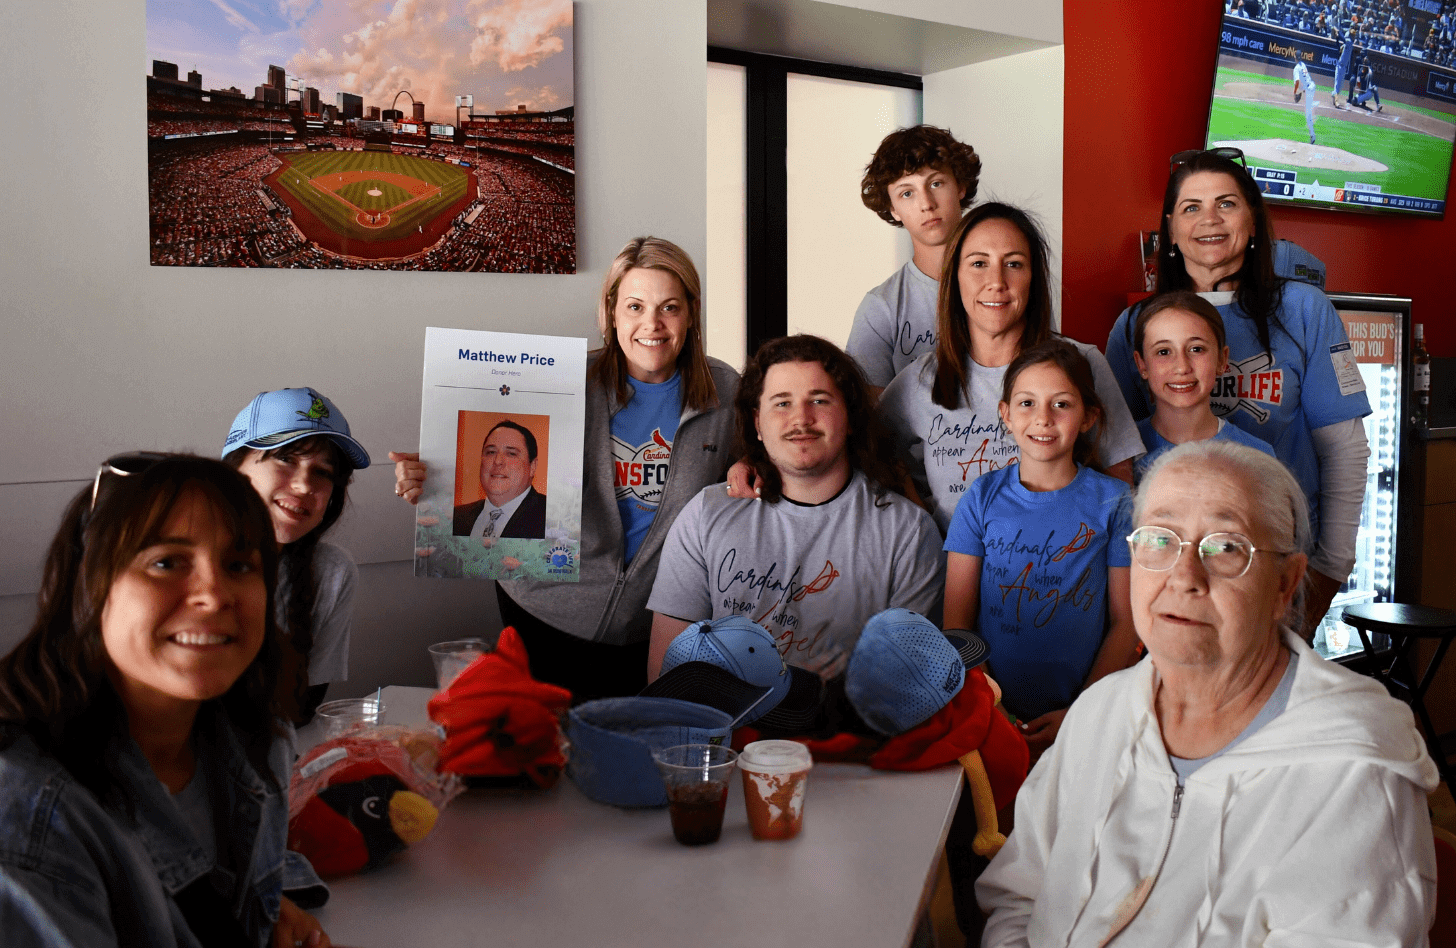 The Price family gathers around a table at Busch Stadium, along with two Mid-America Transplant Employees. One employee holds up a sign with a photo of Matthew Price on it. Matthew became a tissue donor in 2023.